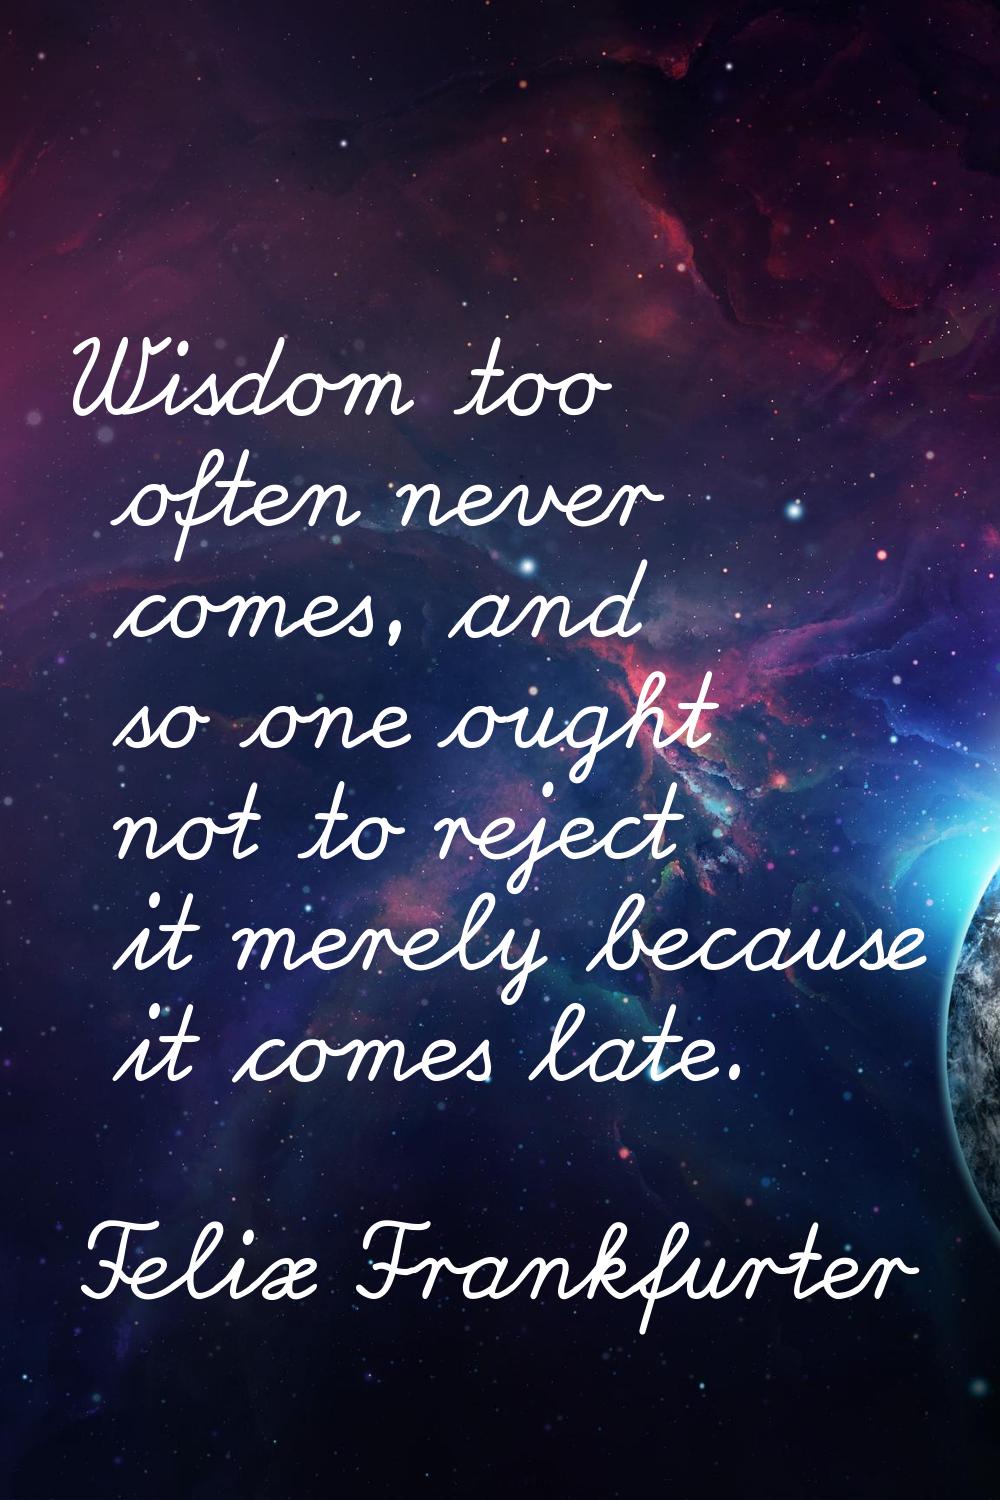 Wisdom too often never comes, and so one ought not to reject it merely because it comes late.